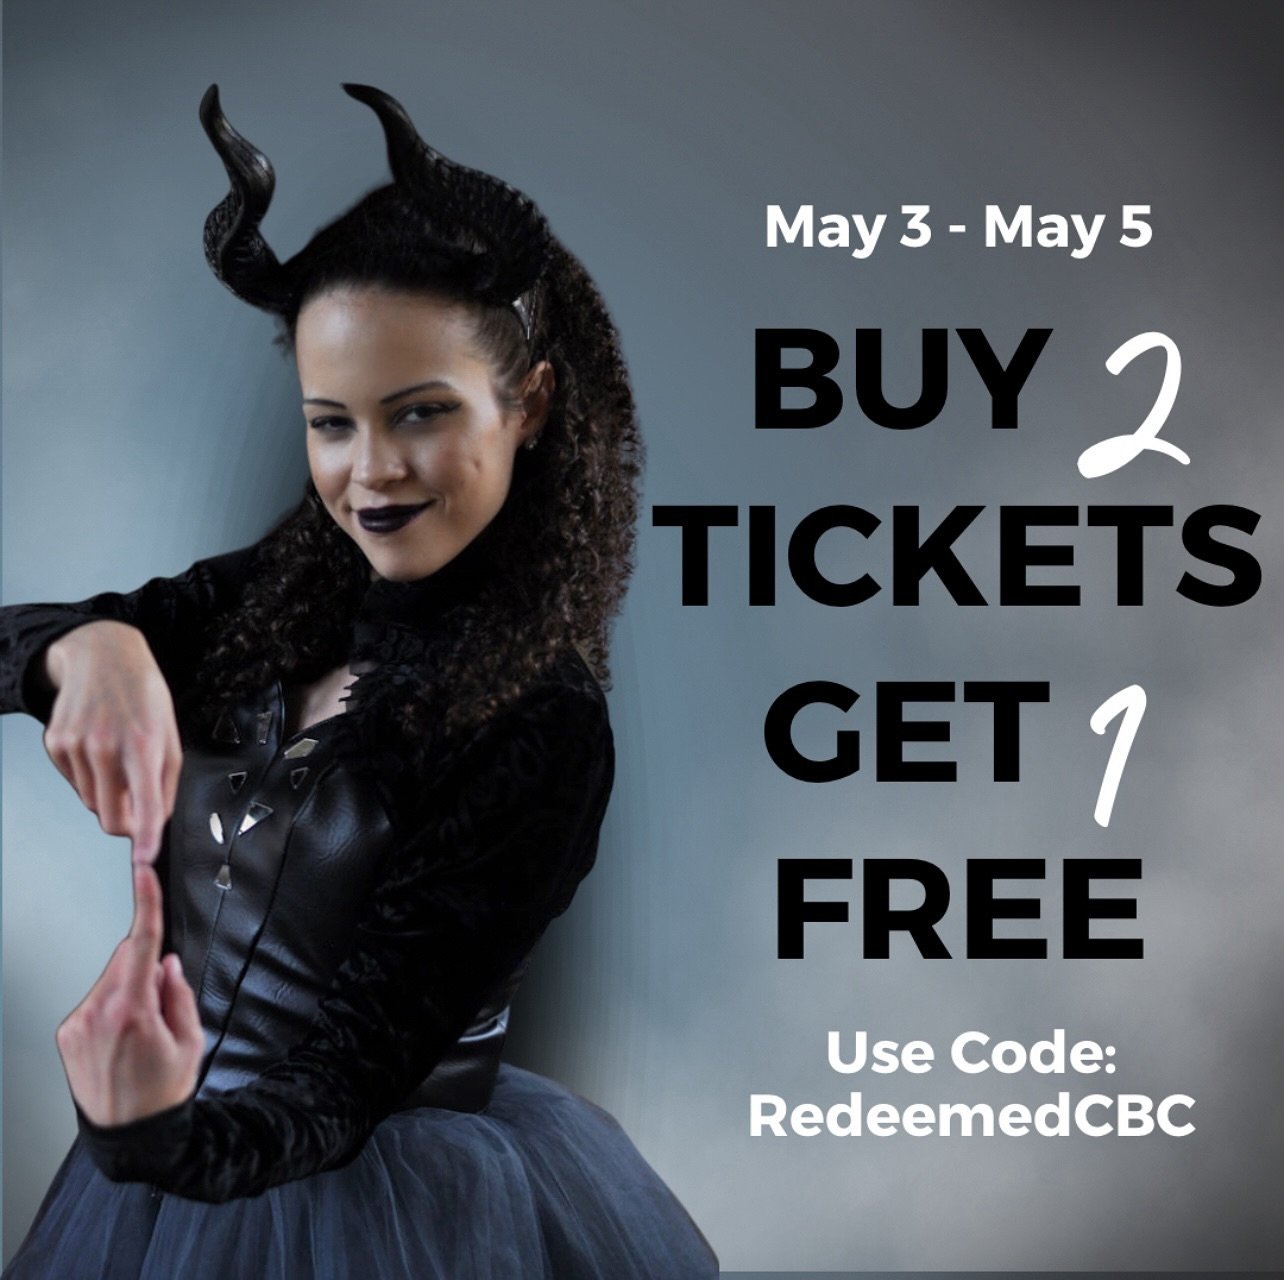 Dive into a world of redemption, passion, and grace with our brand new story ballet, &lsquo;A Villain Redeemed&rsquo;! ✨ 

This weekend ONLY, don&rsquo;t miss this limited-time offer: Buy 2 tickets, get 1 FREE! Use code: &lsquo;RedeemedCBC&rsquo; at 